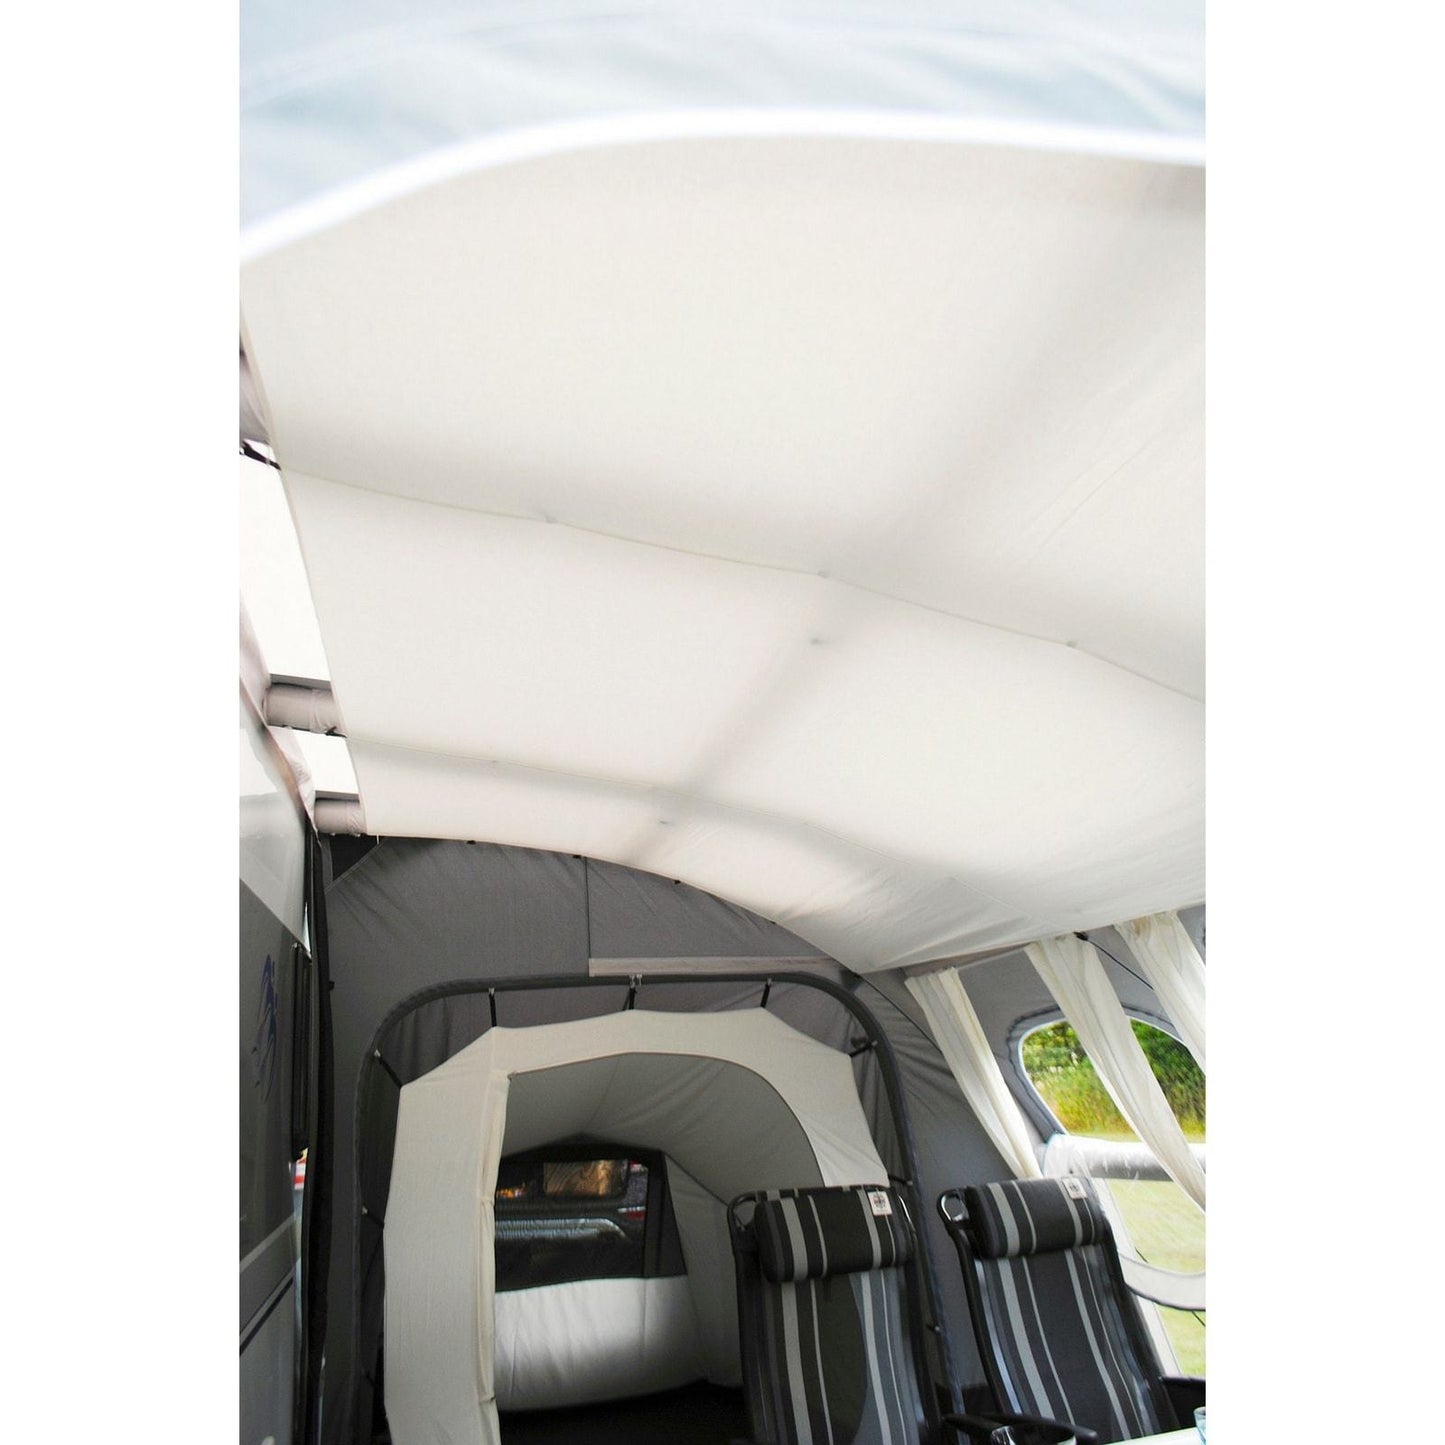 Walker Annexe with Inner Tent for Caravan Awning (2018) - Quality Caravan Awnings